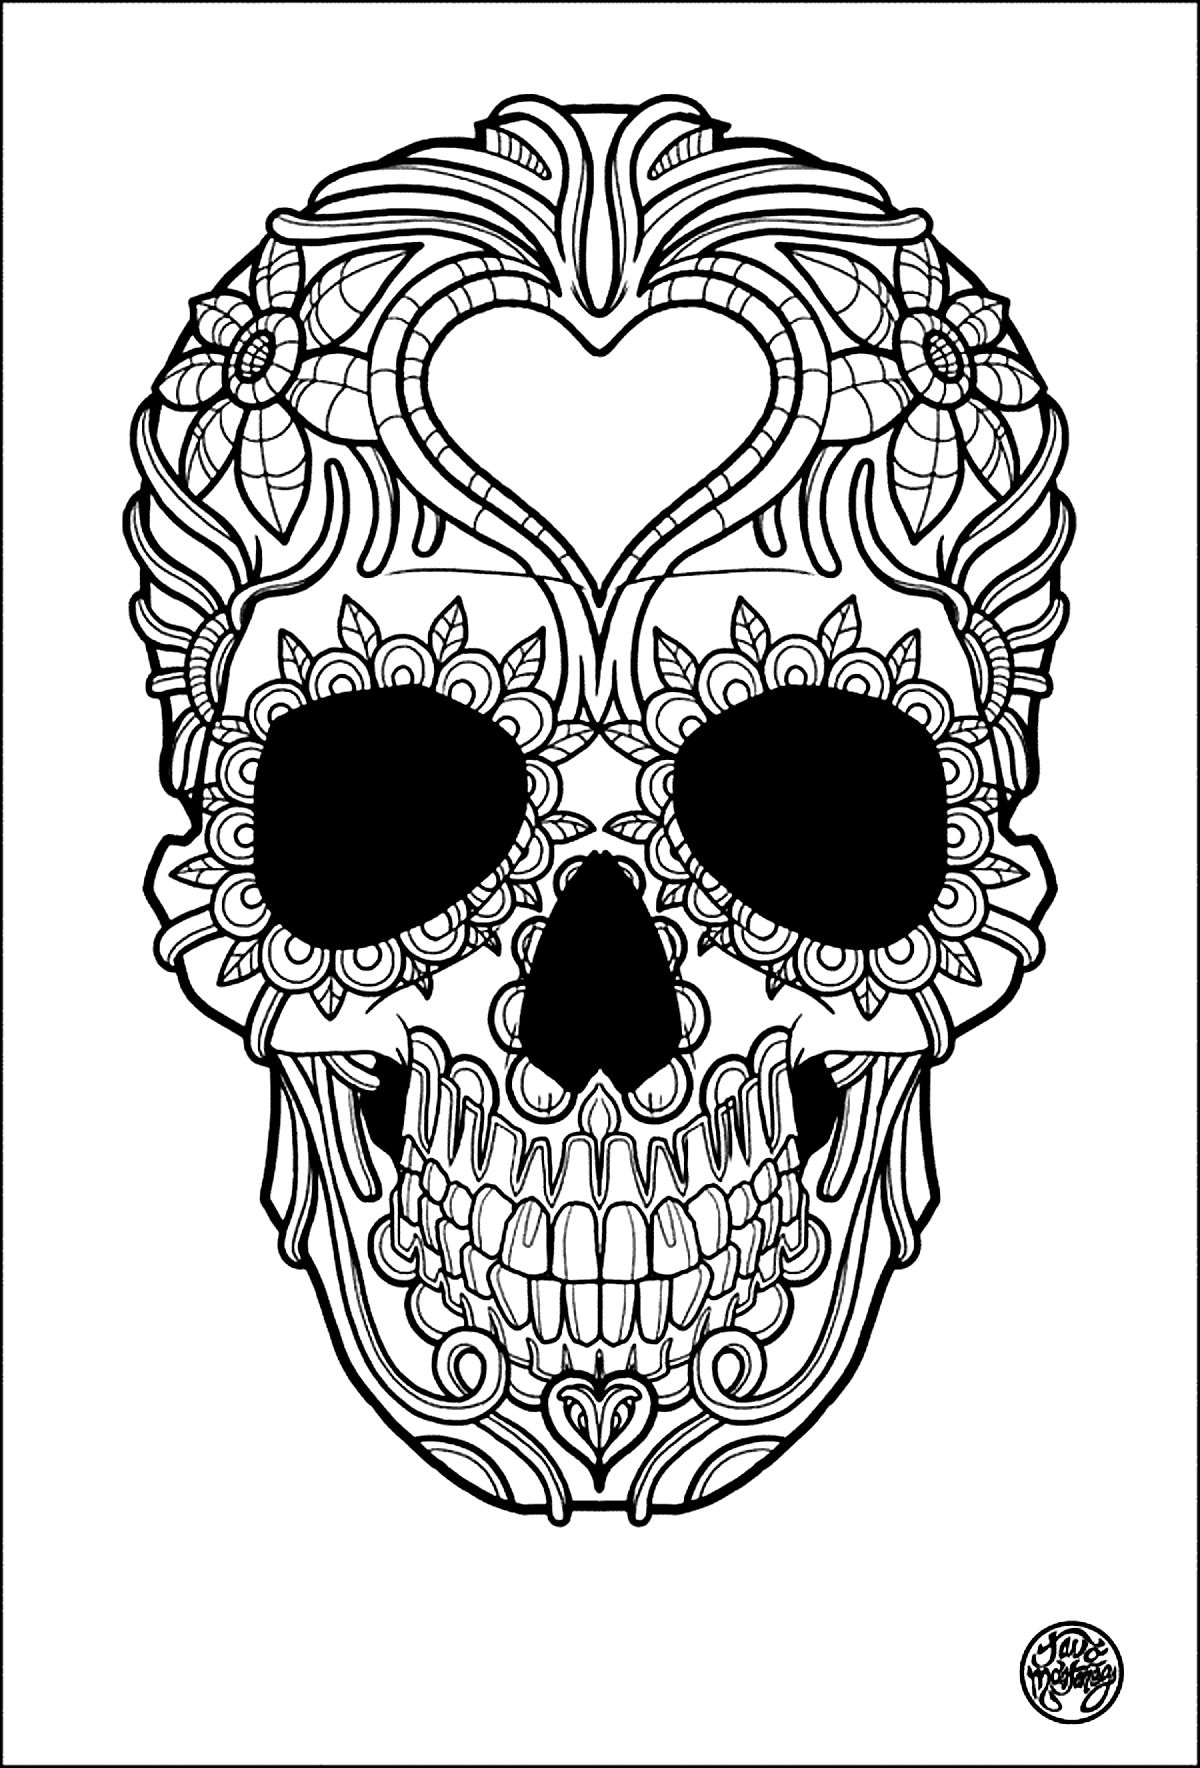 Tattoo simple skull tattoo - Tattoos Adult Coloring Pages - Page 2/